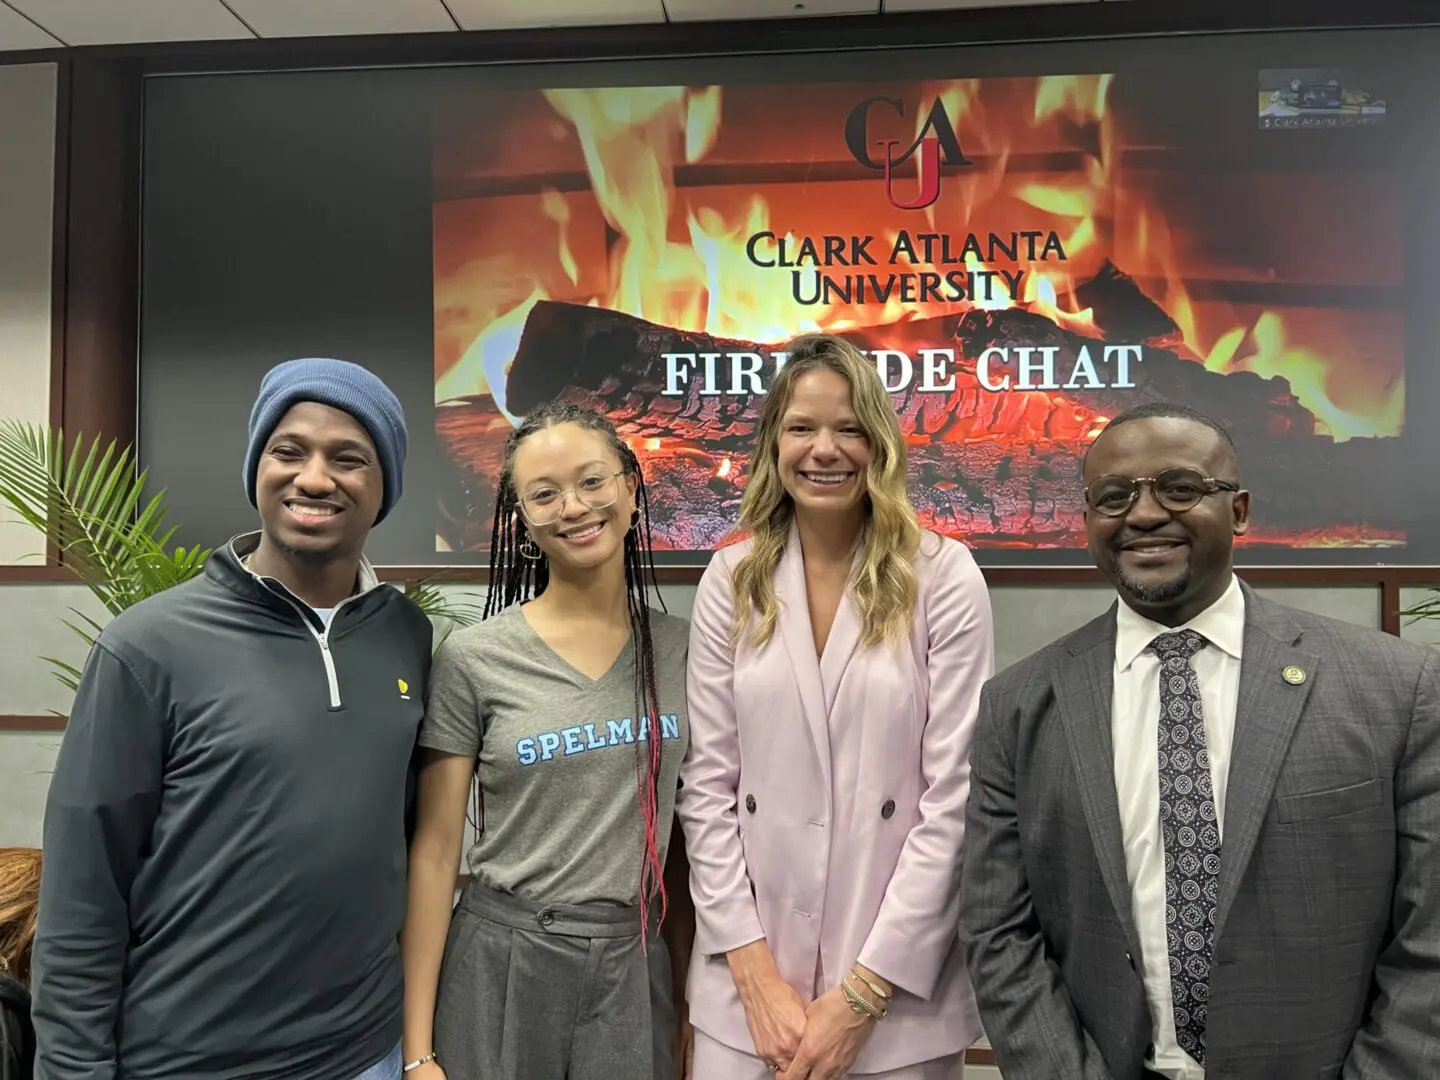 A group of people standing in front of a fire code chat sign.